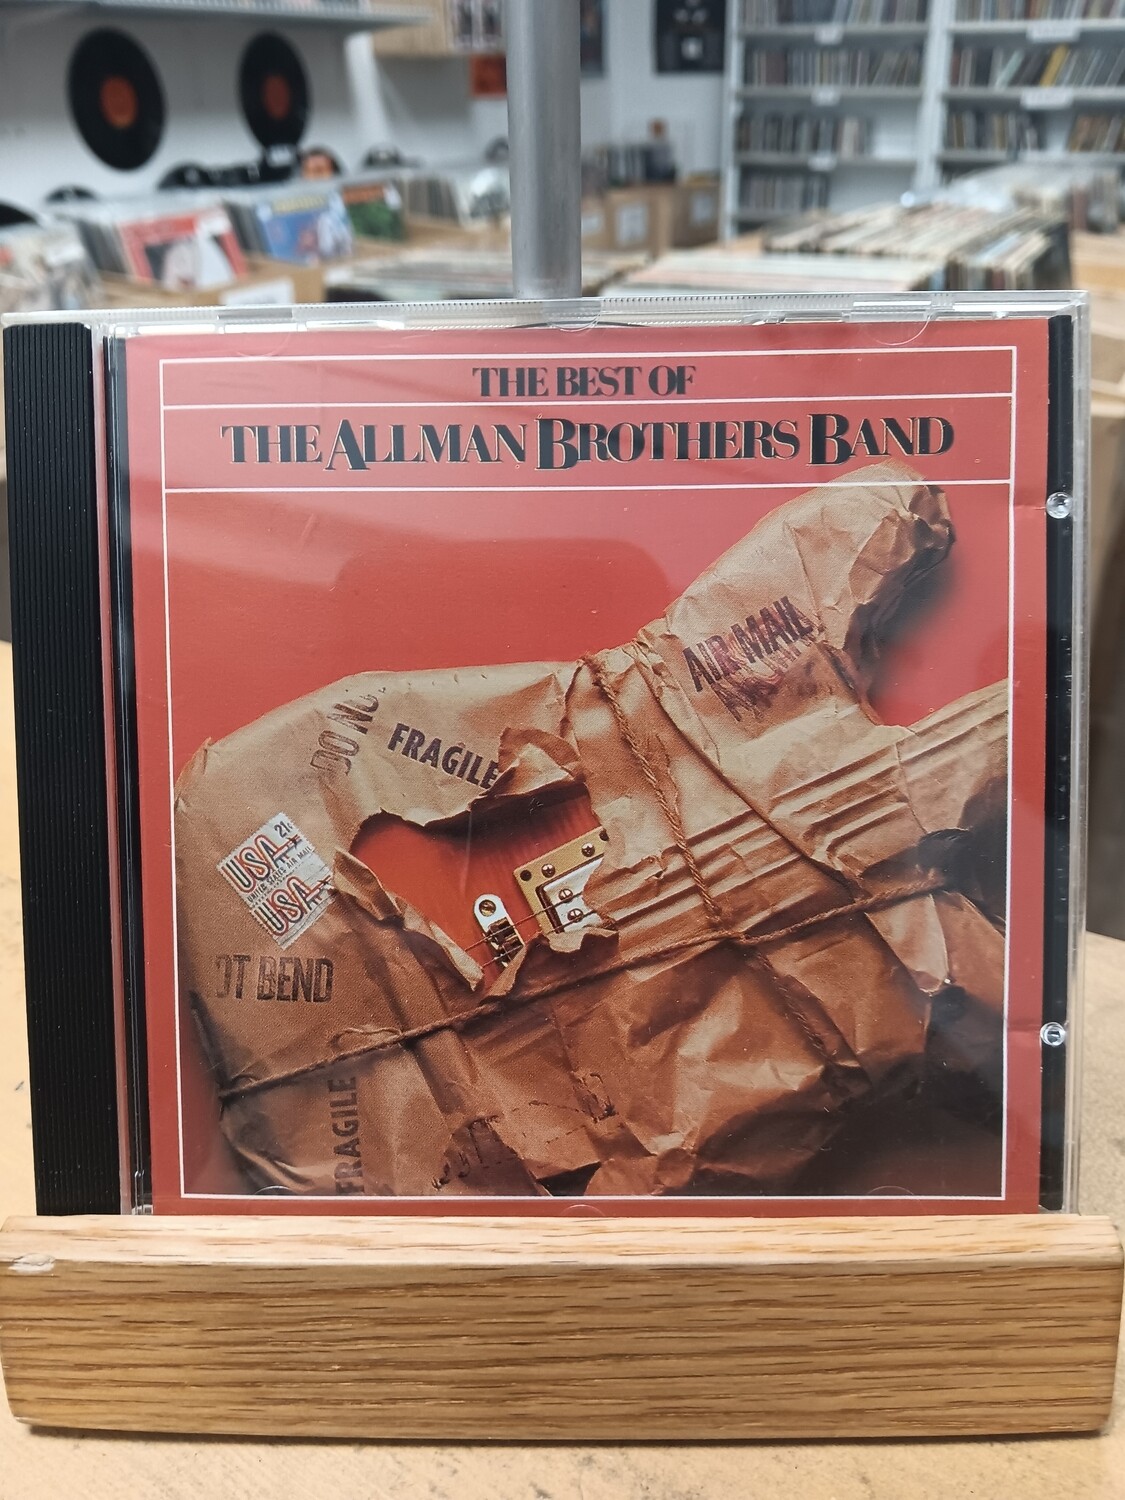 THE ALLMAN BROTHERS BAND - The Best of (CD)